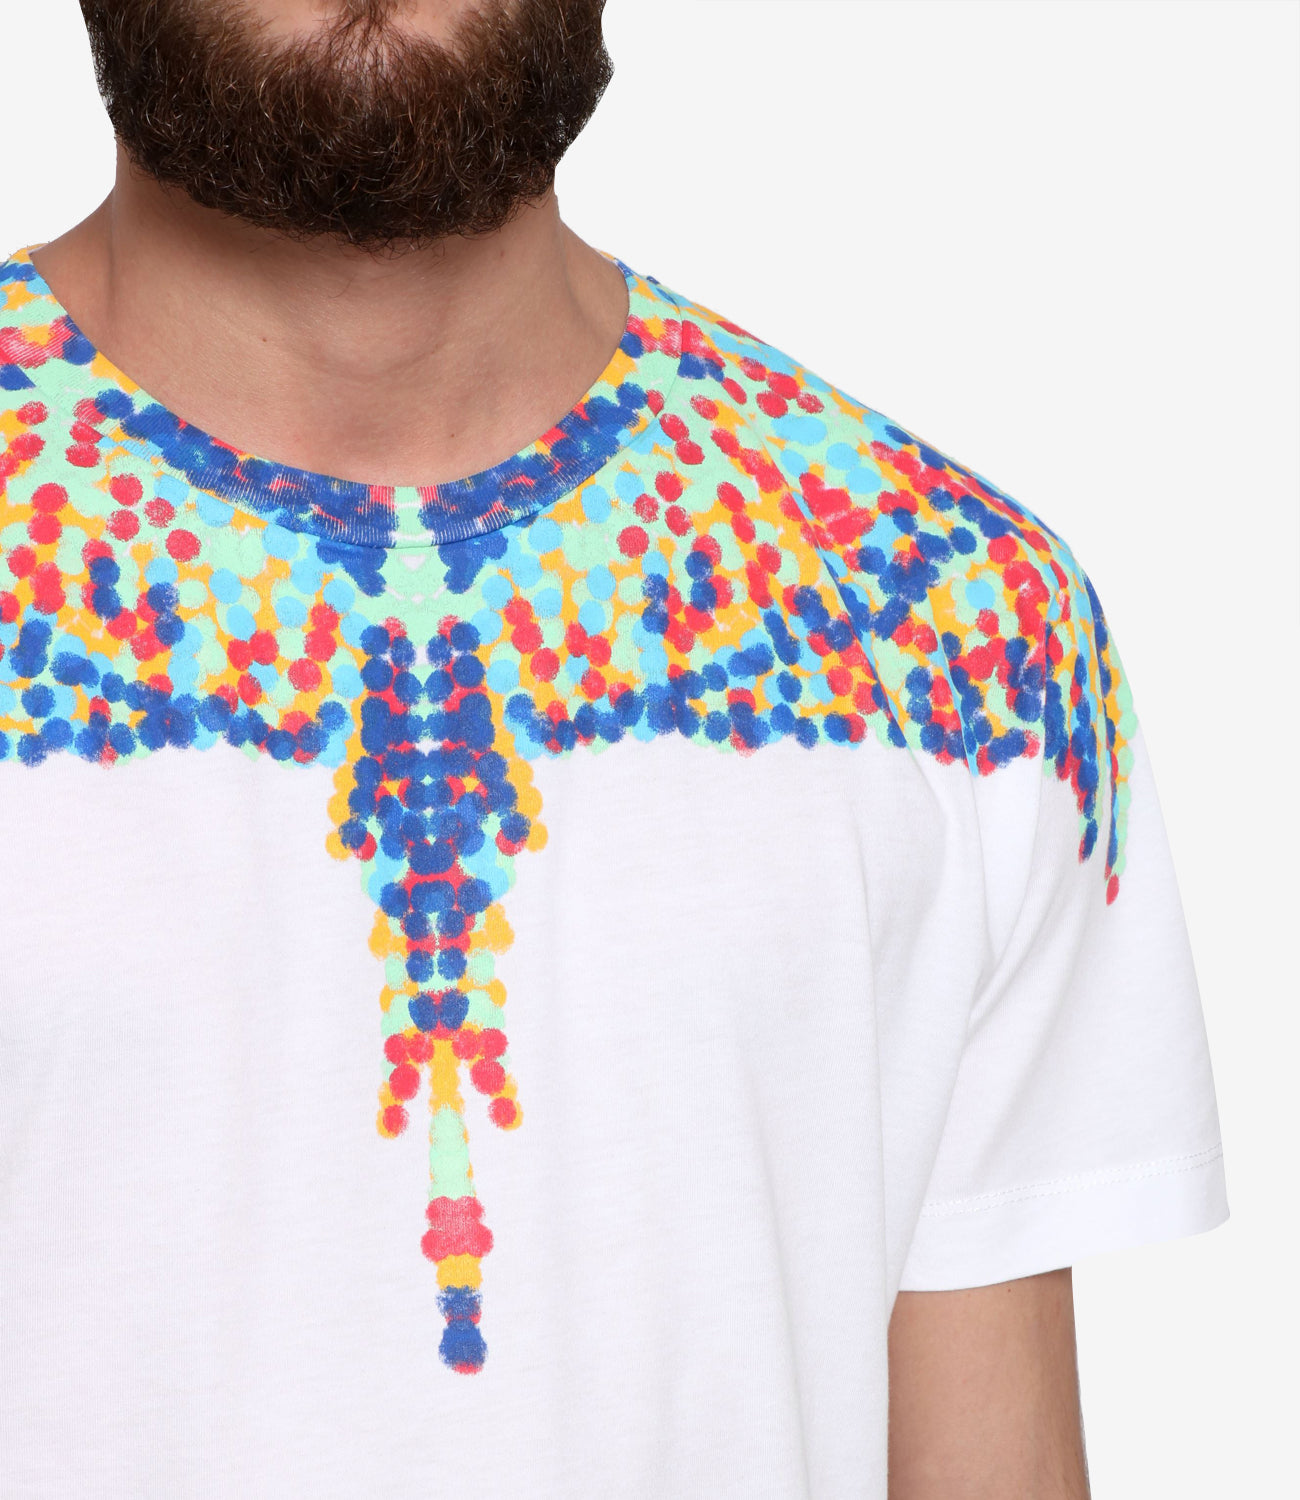 Marcelo Burlon | Icon Wings T-shirt White and Pink